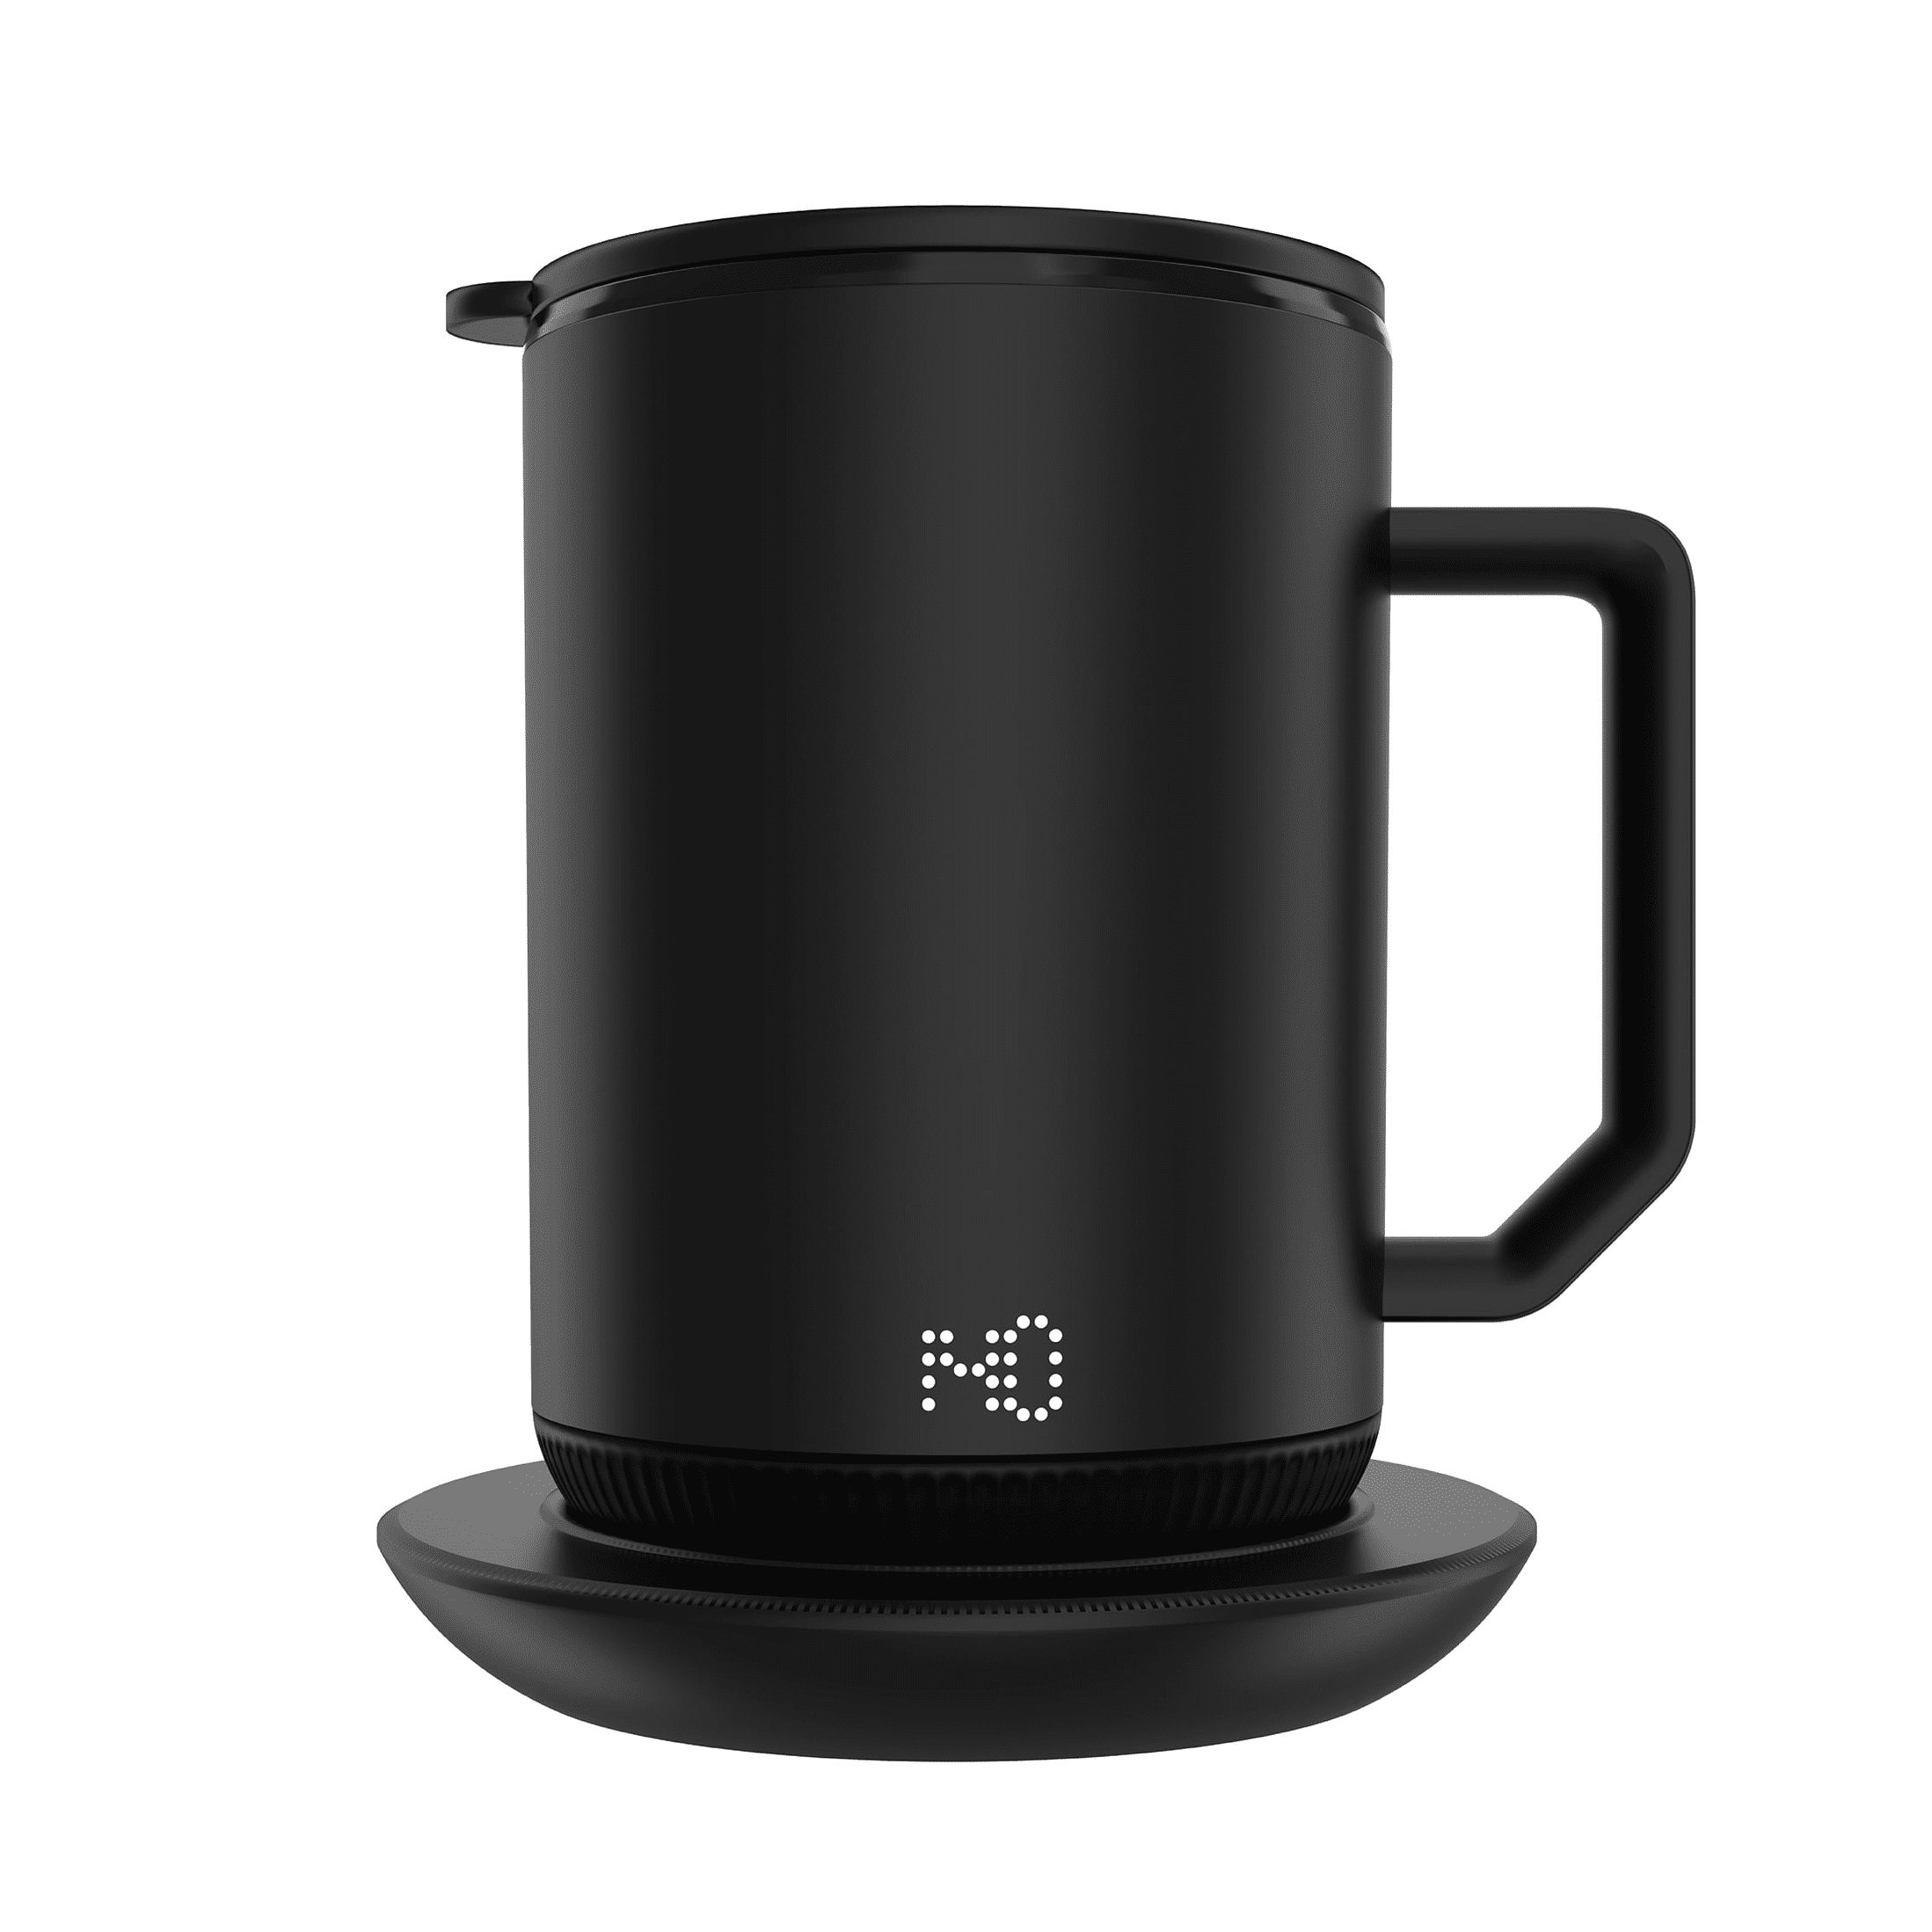 Ebooine Smart Coffee Mug Warmer Self-heated Cup, 12 oz, Black, Thermostatic Cup for Desk Home Office-Phone Wireless Charging Fun